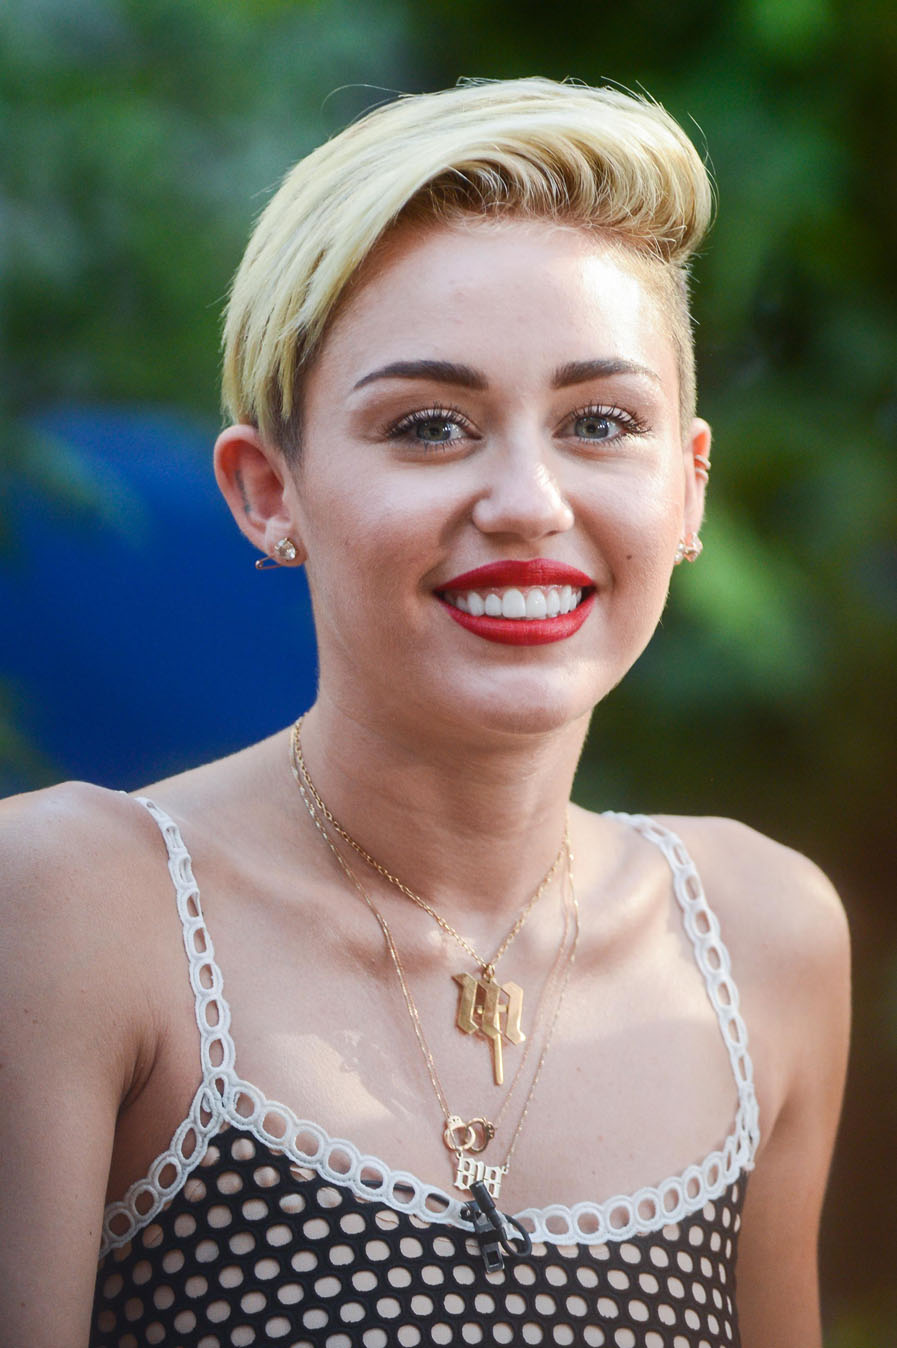 Miley Cyrus Is Already Sick of Her Short Hair | StyleCaster